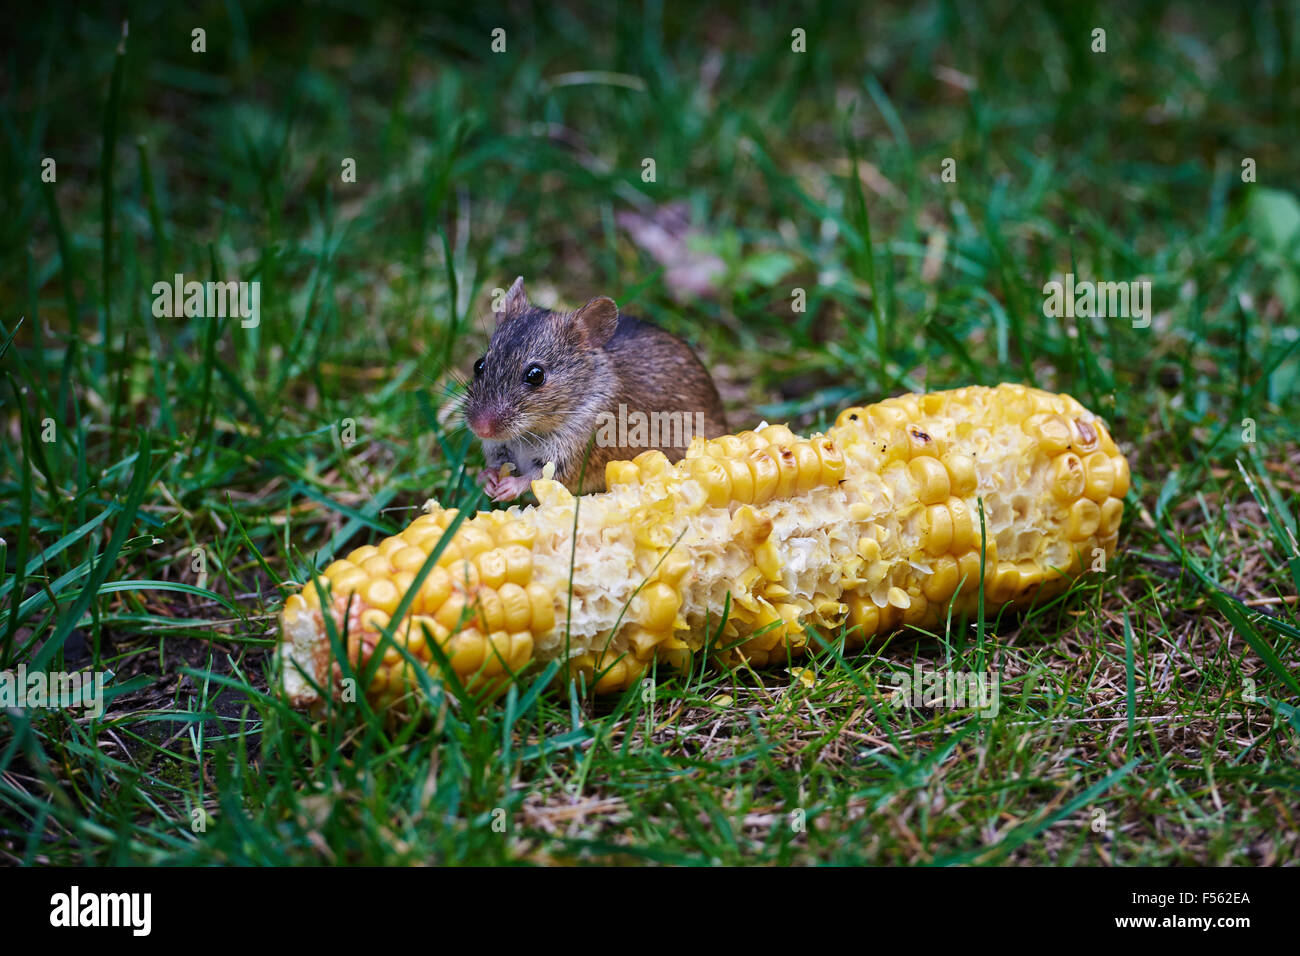 19.07.2015, Berlin, Berlin, Germany  - The fire mouse (Apodemus agrarius) counts within the family of muridae (Muridae) to the kind of wood mice (Apodemus). In English, the Fire Mouse Striped field mouse is called. 00Y150719D004CAROEX.JPG - NOT for SALE in G E R M A N Y, A U S T R I A, S W I T Z E R L A N D [MODEL RELEASE: NOT APPLICABLE, PROPERTY RELEASE: NO (c) caro photo agency / Teich, http://www.caro-images.pl, info@carofoto.pl - In case of using the picture for non-journalistic purposes, please contact the agency - the picture is subject to royalty!] Stock Photo